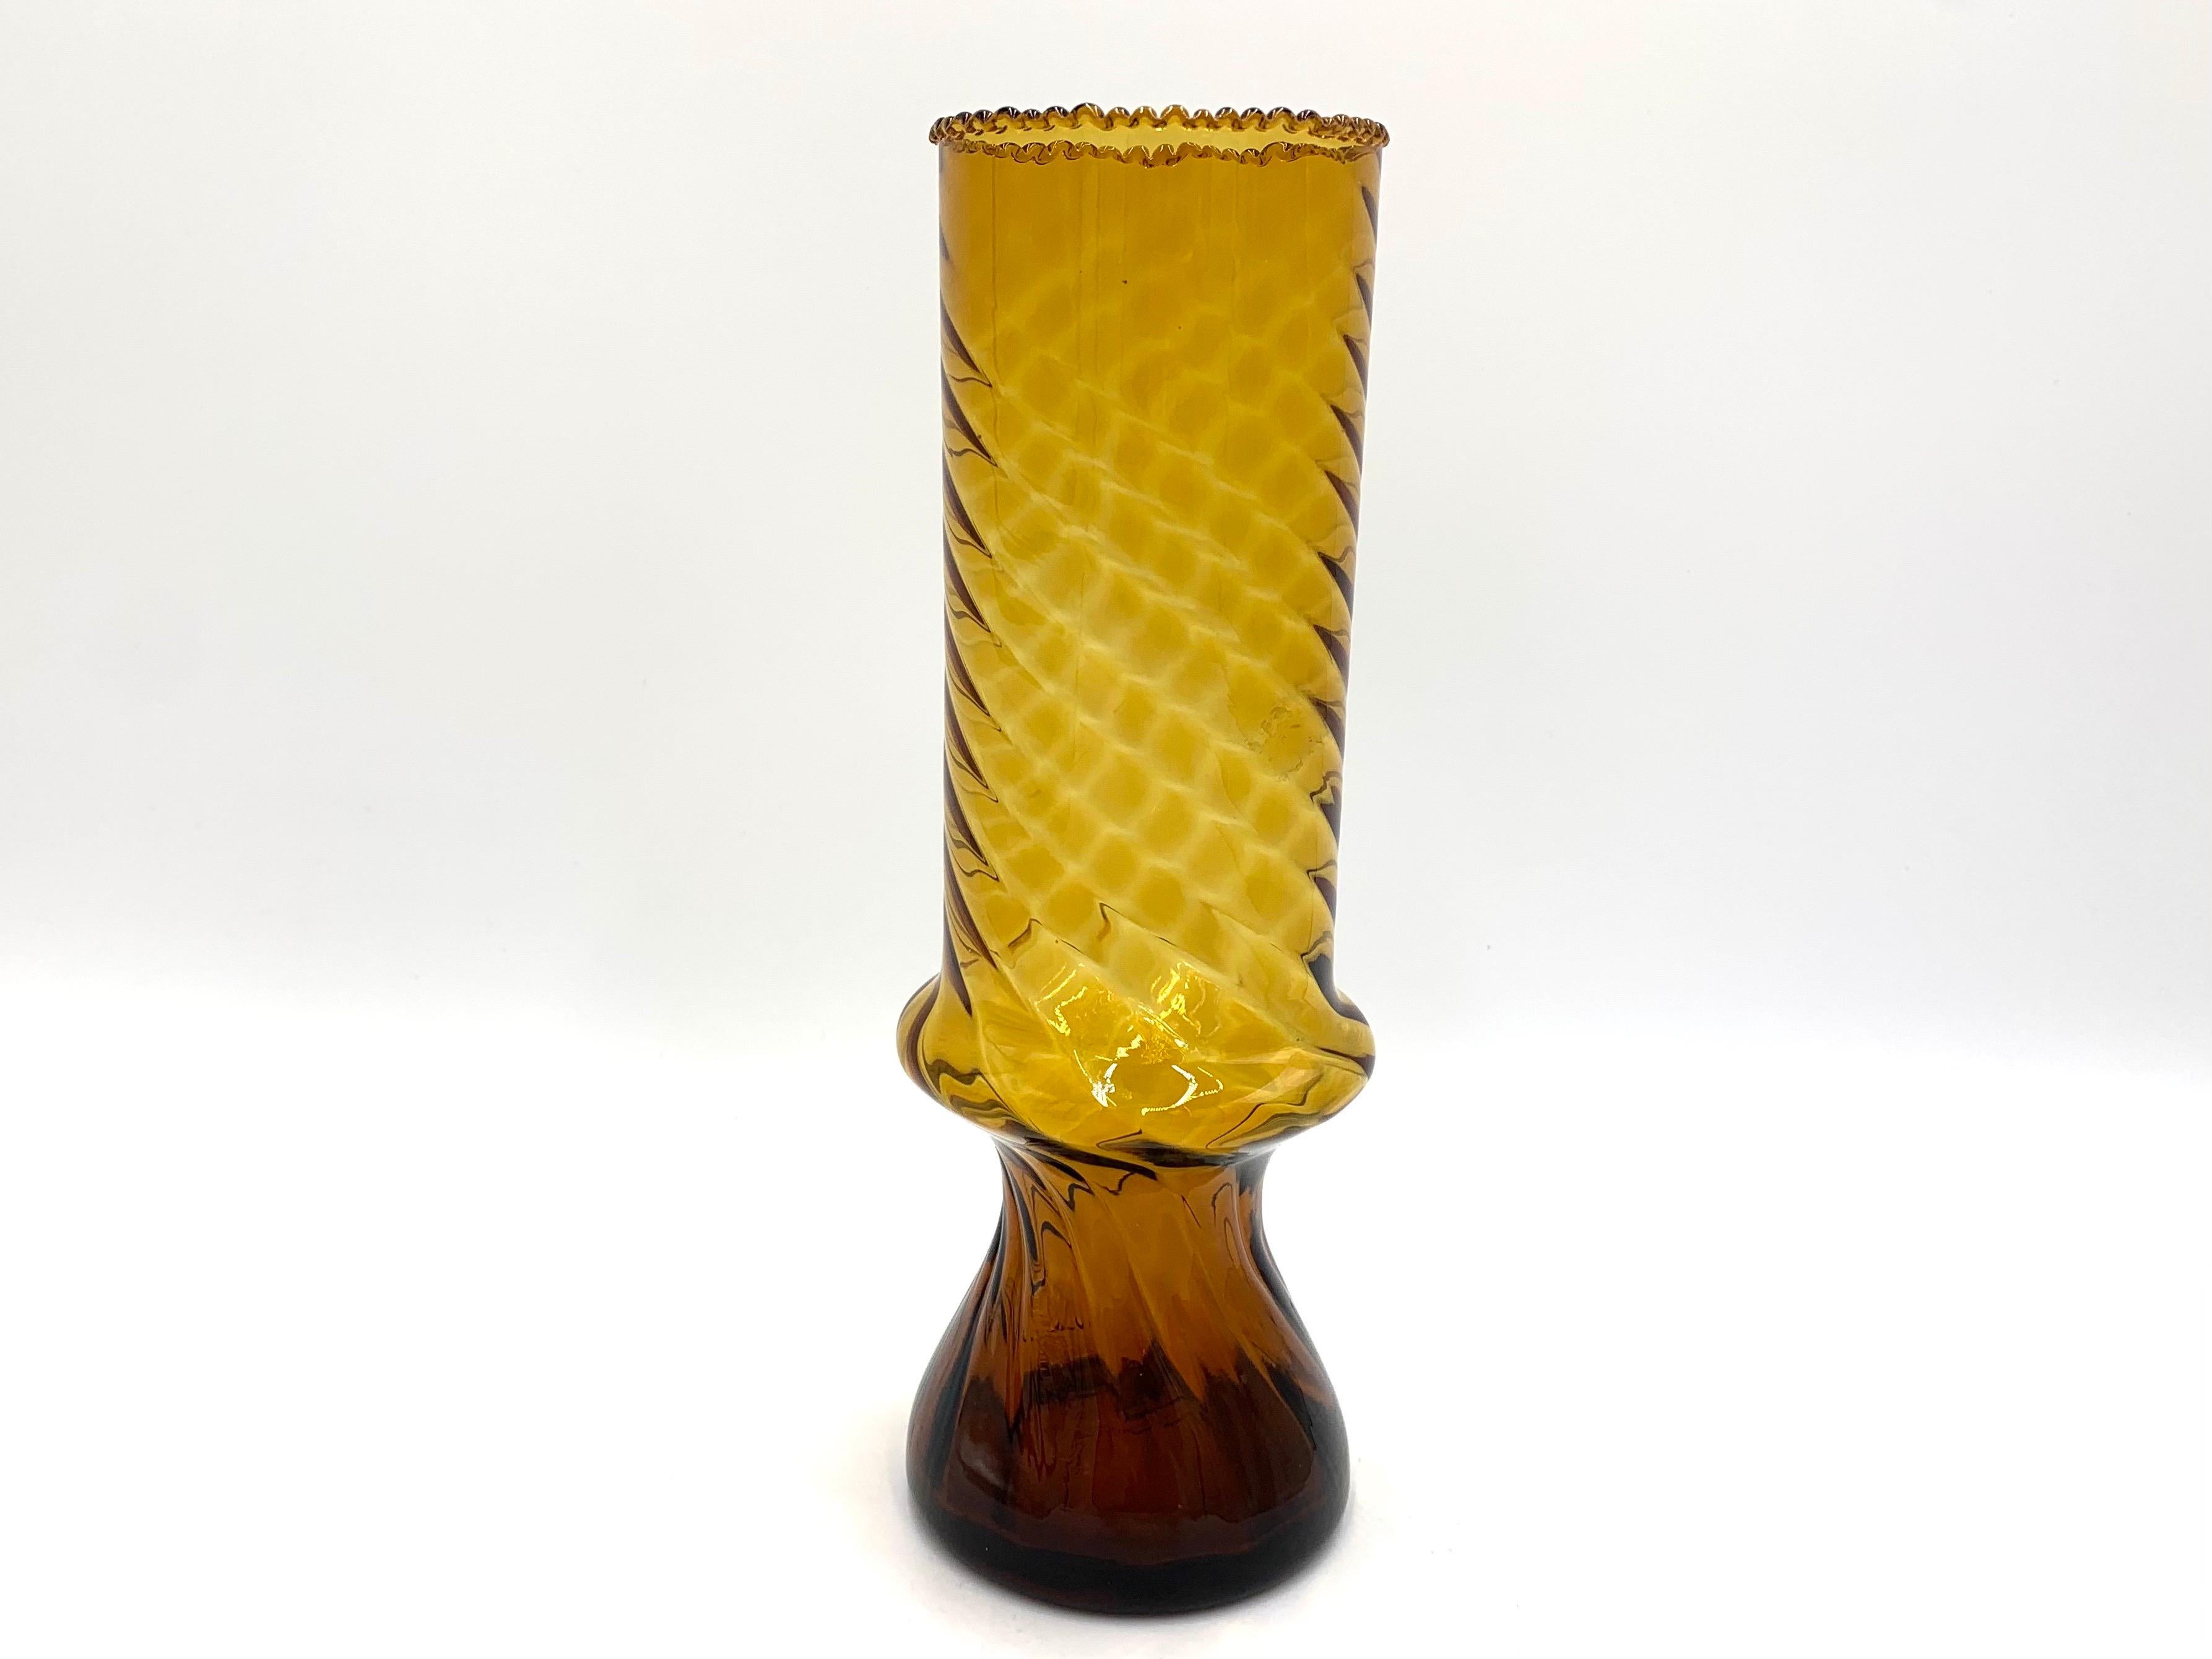 Beautiful nice shaped midcentury glass. Produced in Poland in the 1960s. Very good condition.